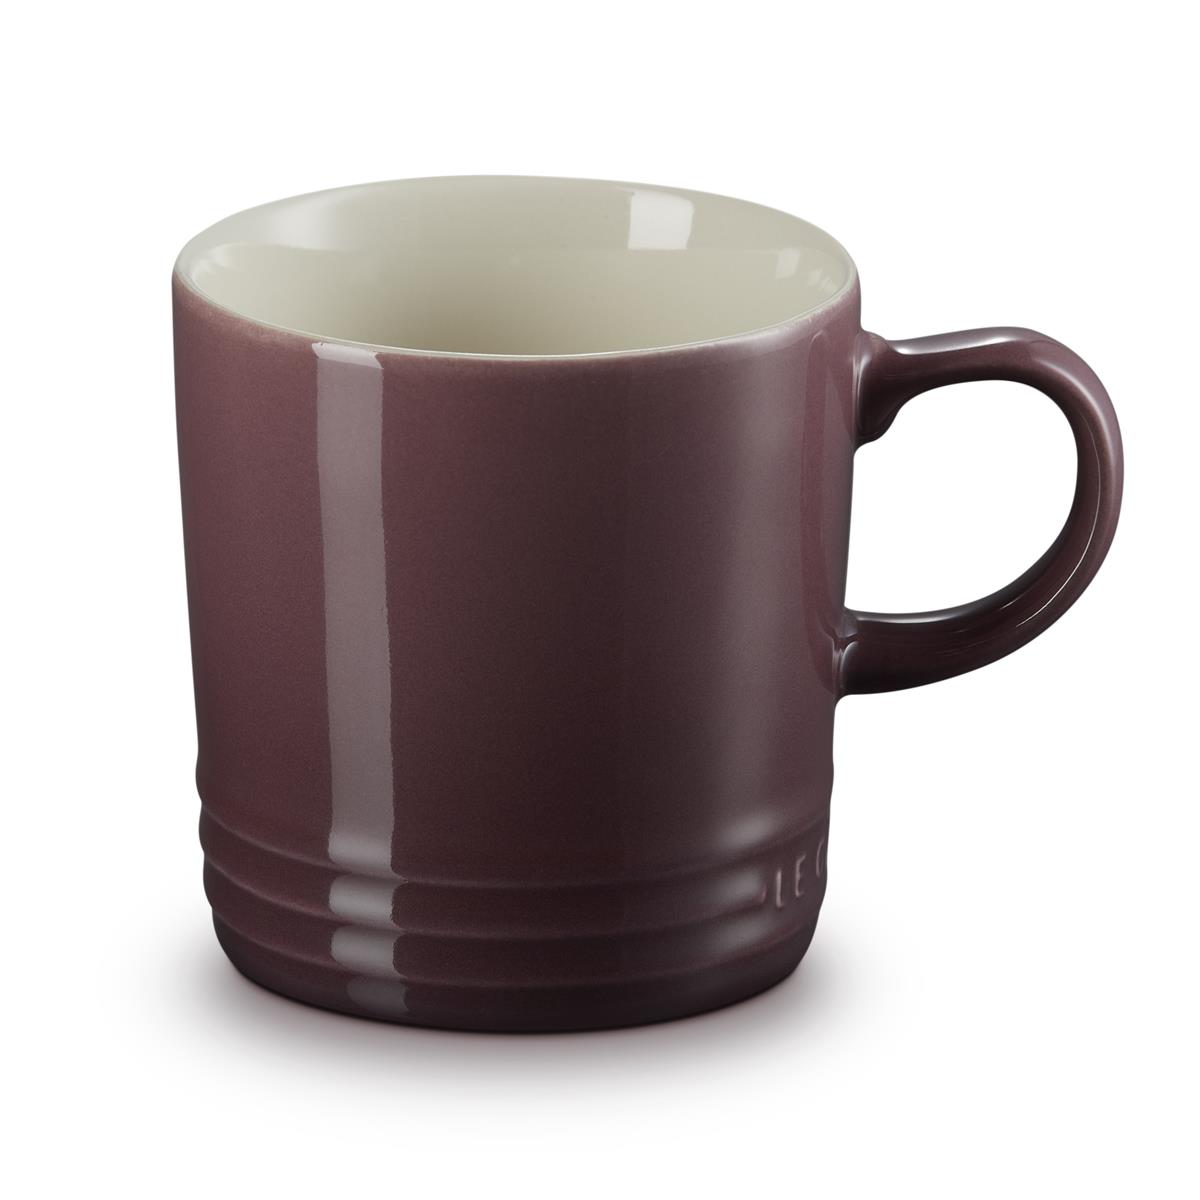 How much ml is a mug from Le Creuset?